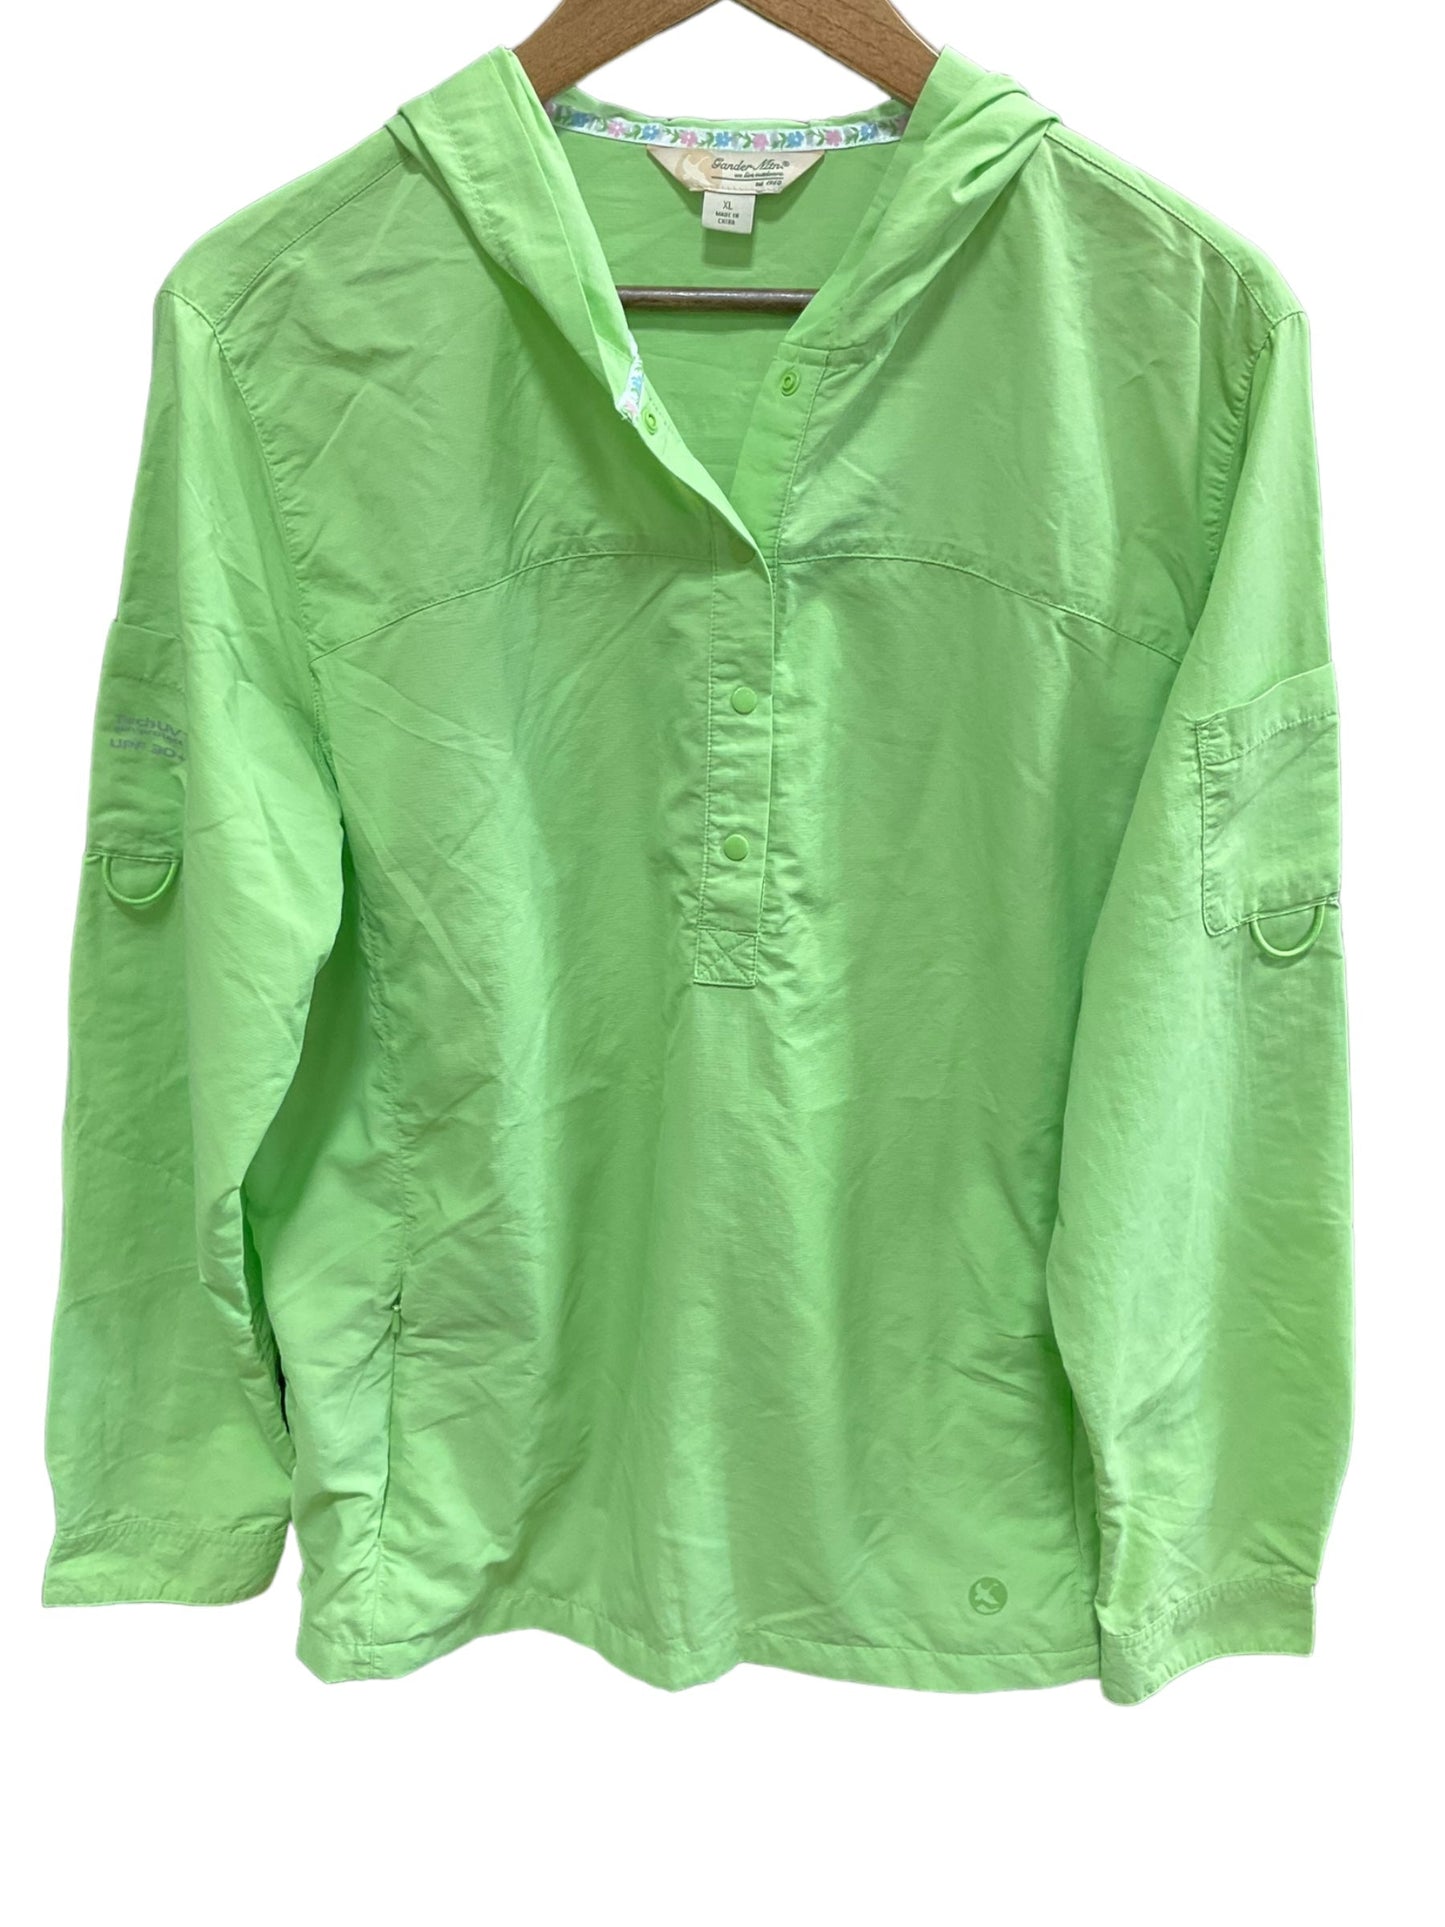 Green Athletic Top Long Sleeve Hoodie Clothes Mentor, Size Xl